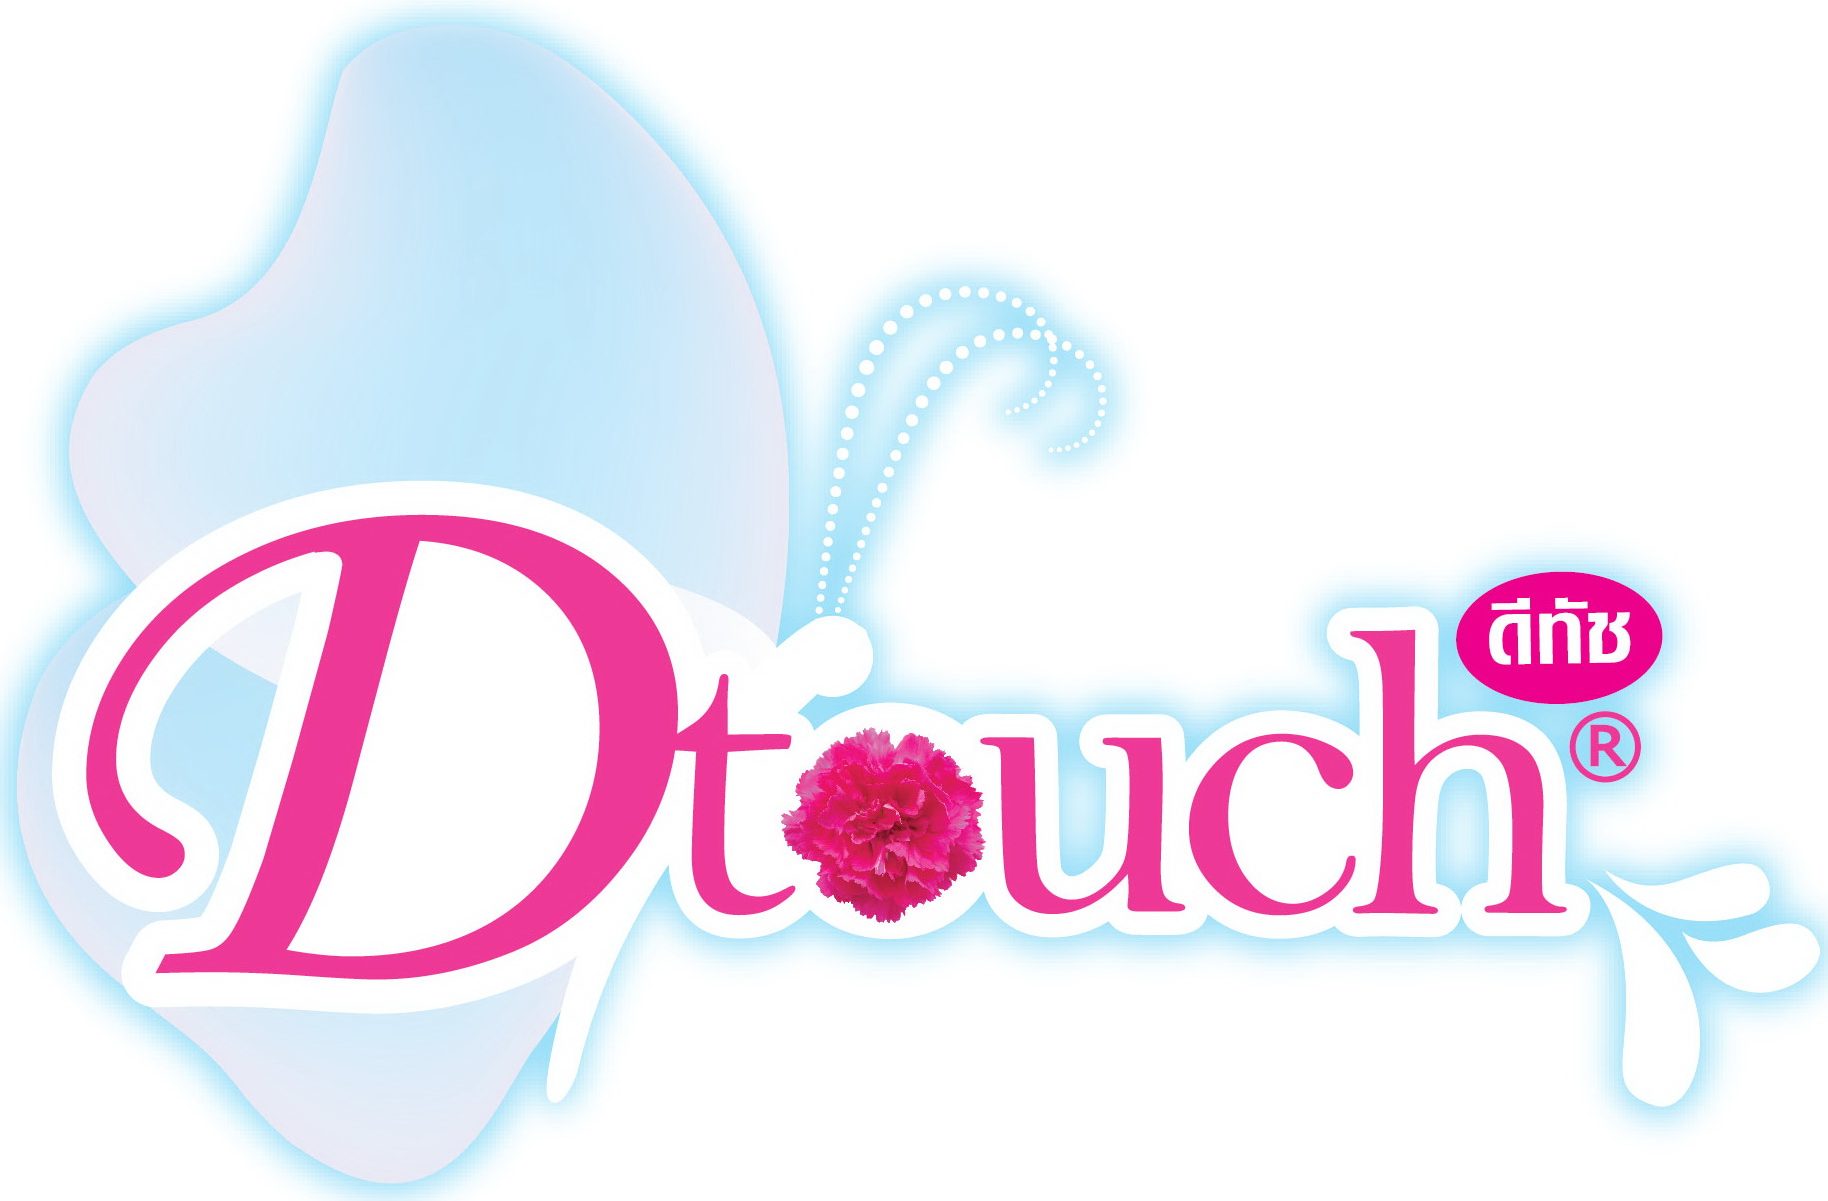 Dtouch